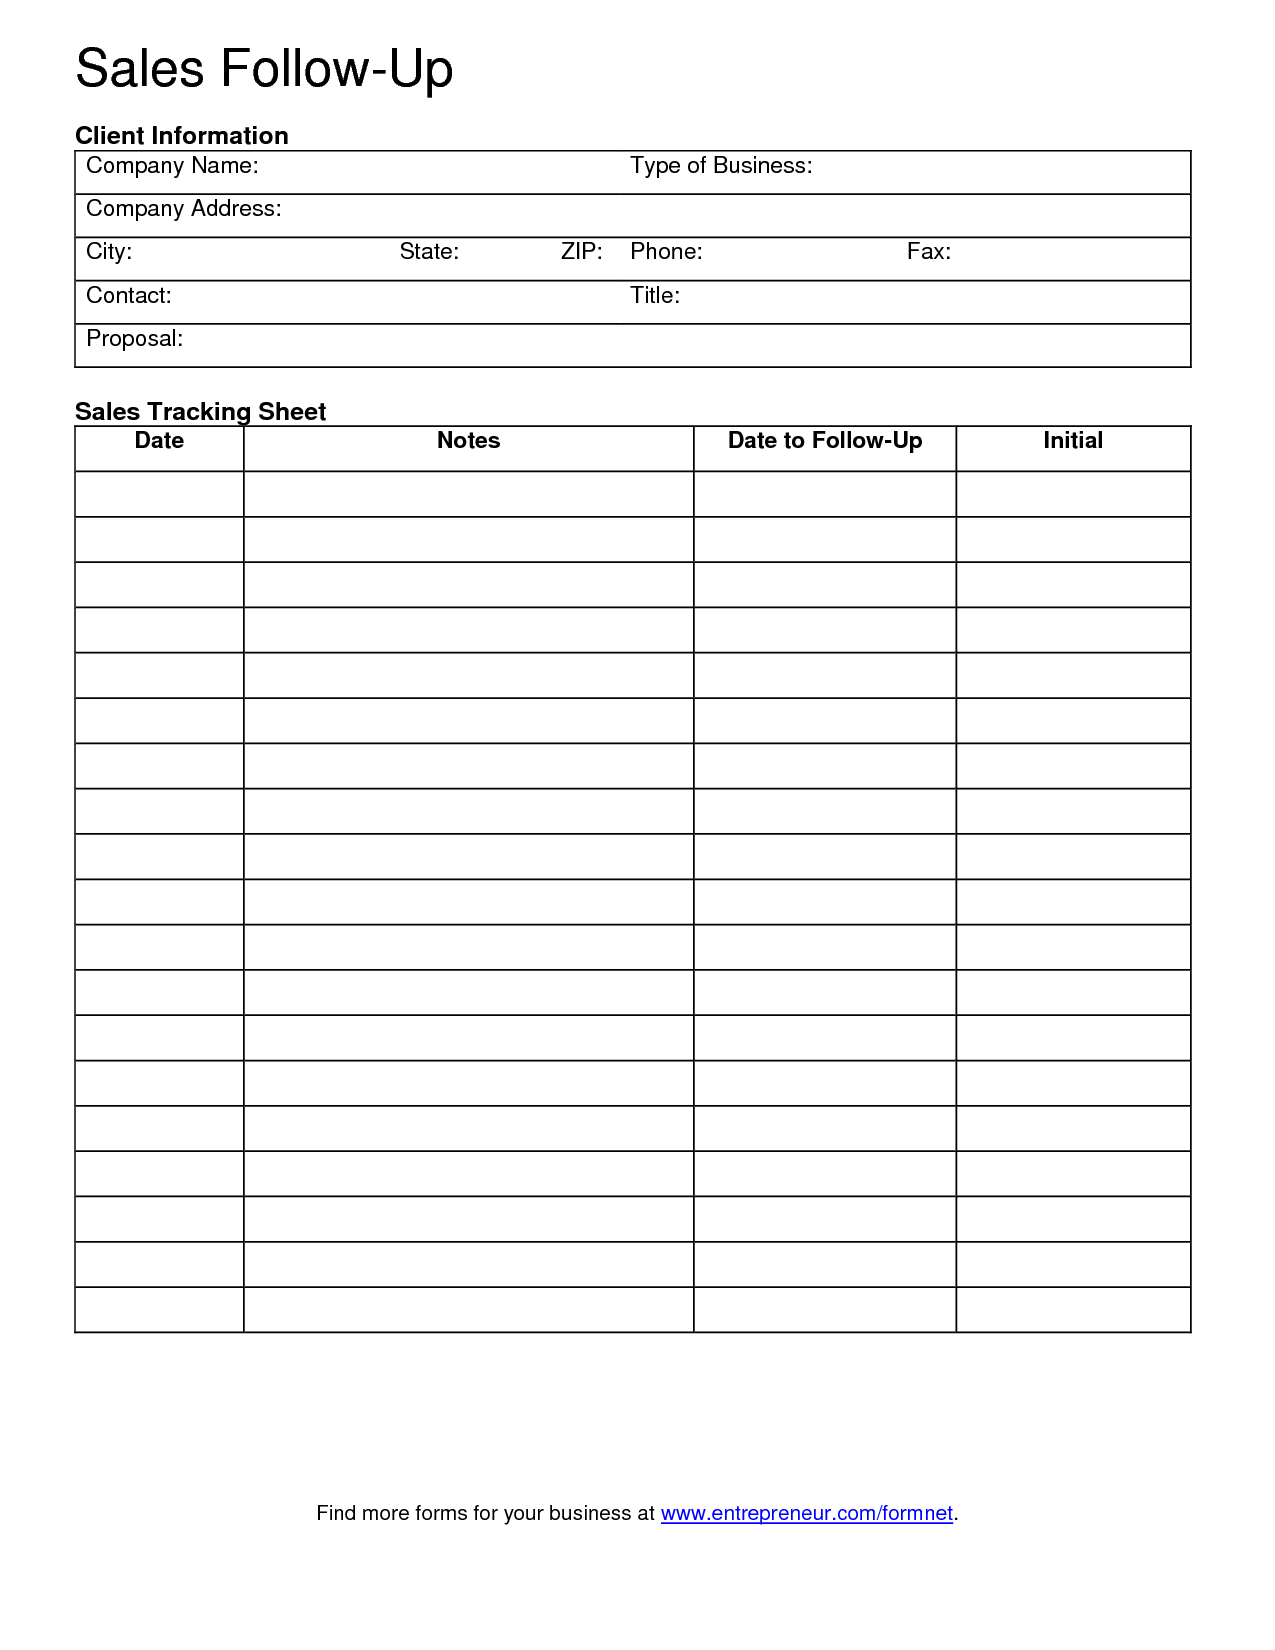 Free Client Contact Sheet | Sales Follow-Up Template | Cars - Free Printable Forms For Organizing